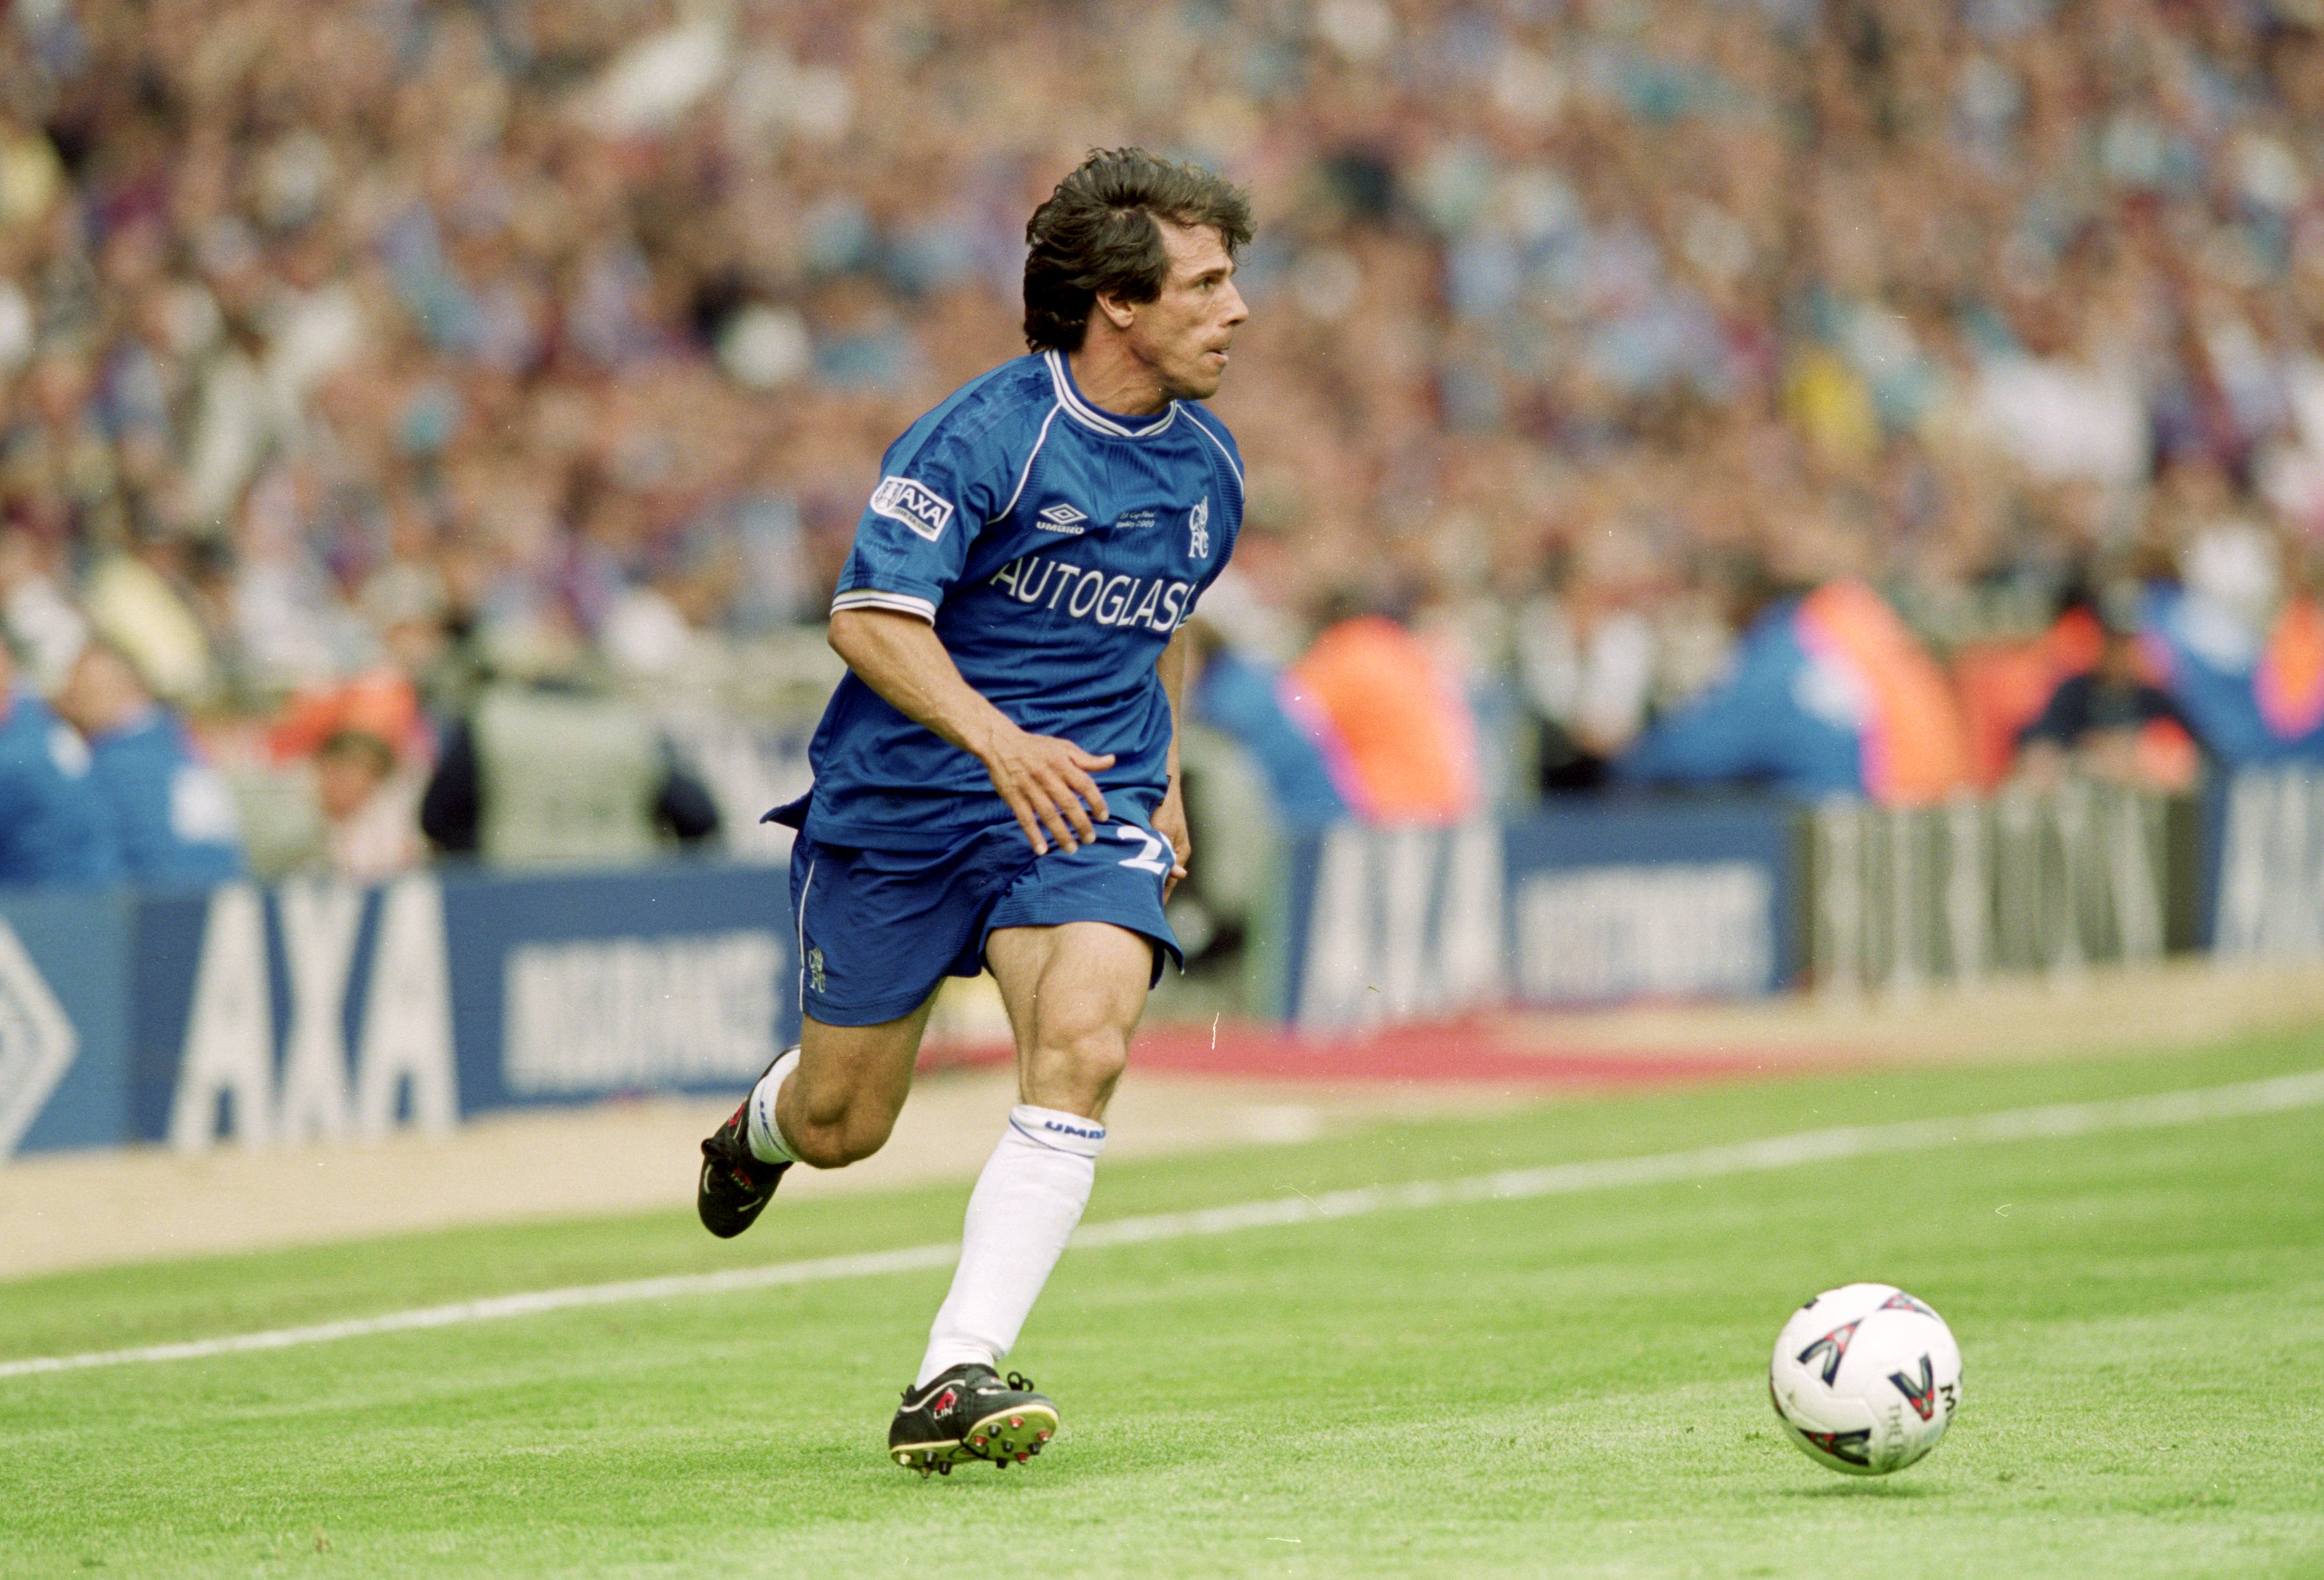 20 May 2000:  Gianfranco Zola of Chelsea in action during the AXA FA Cup Final 2000 against Aston Villa at Wembley Stadium, London, England. Chelsea won 1-0. \ Mandatory Credit: Shaun Botterill /Allsport